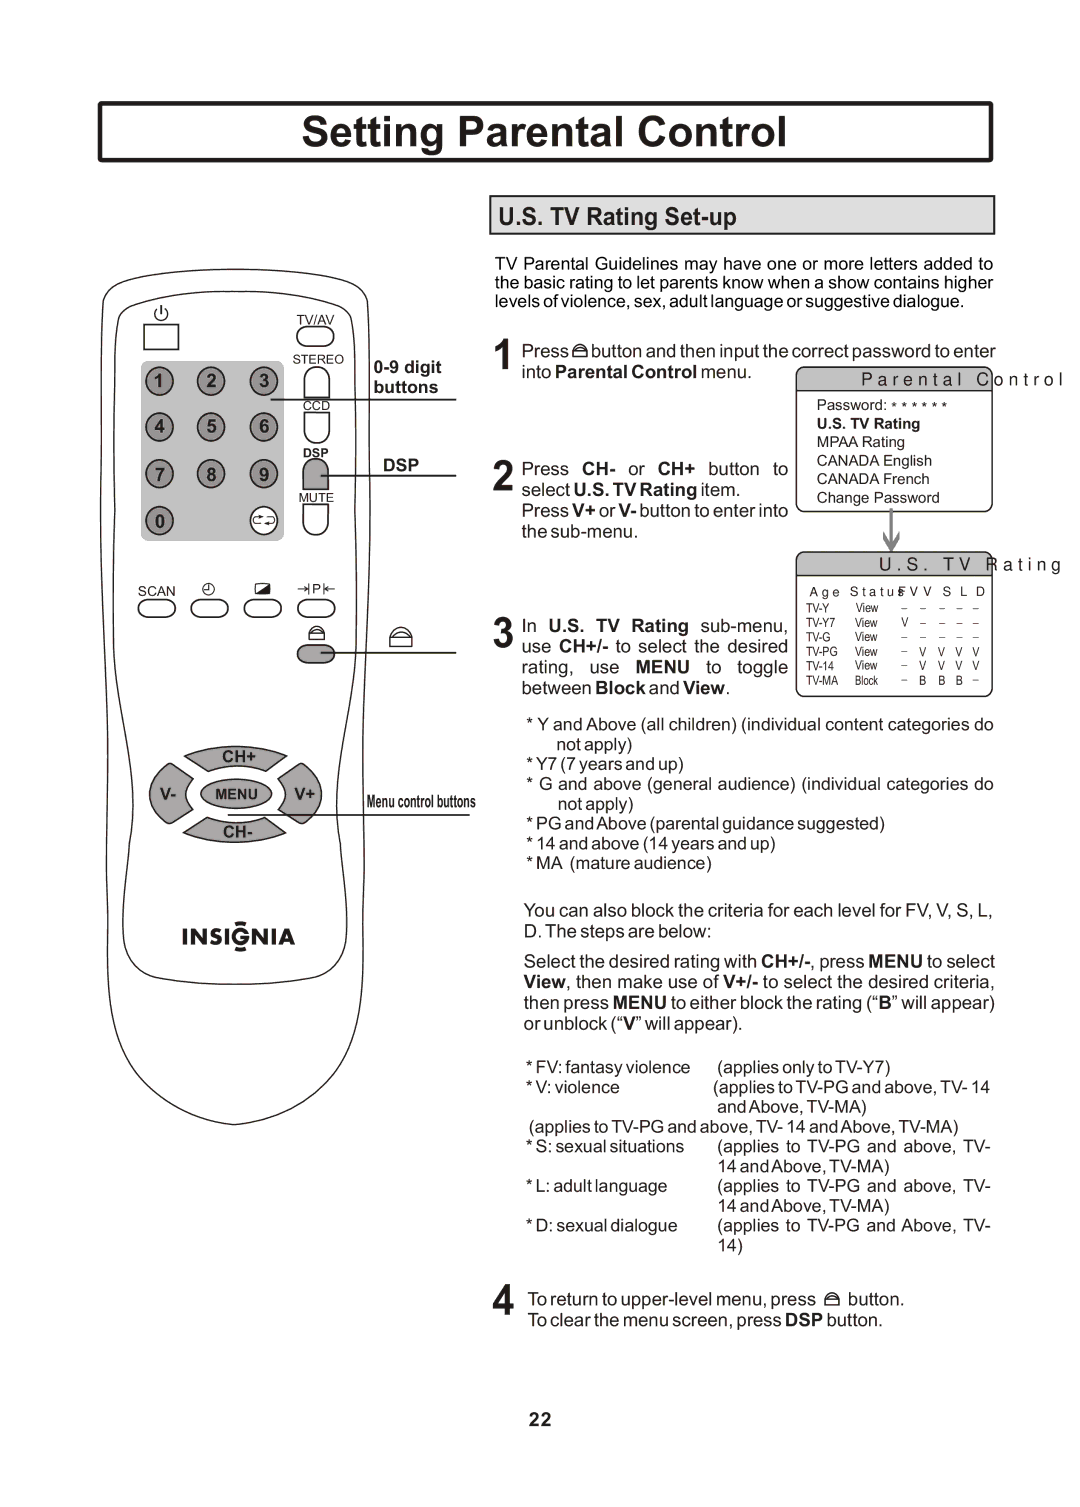 Insignia IS-TV040922 user manual TV Rating Set-up 